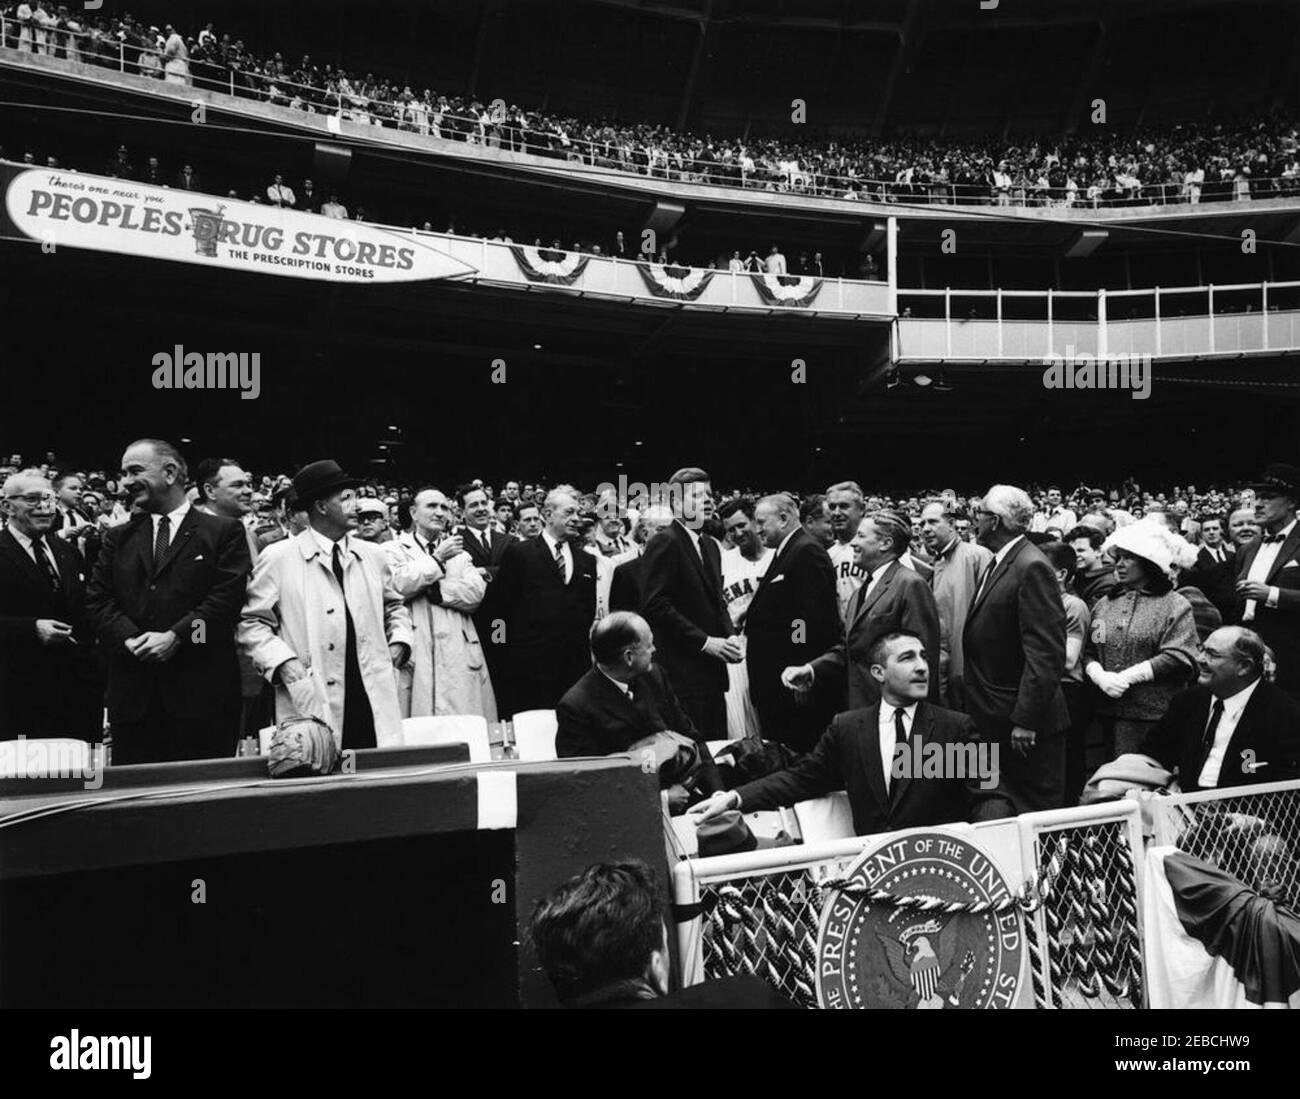 Opening Day at D.C. Stadium, 1962 Baseball Season, 2:00PM. President John F. Kennedy speaks with baseball officials before the start of the opening game of the 1962 baseball season. (L-R) Seated: Secretary of the Treasury C. Douglas Dillon (turned to observe President Kennedy); Secretary of the Interior Stewart Udall. (L-R) First row of standing audience members: Representative Carroll D. Kearns of Pennsylvania; Vice President Lyndon B. Johnson; Representative Hale Boggs of Louisiana (behind Vice President Johnson); Special Assistant to the President Dave Powers; Senator Mike Mansfield of Mont Stock Photo